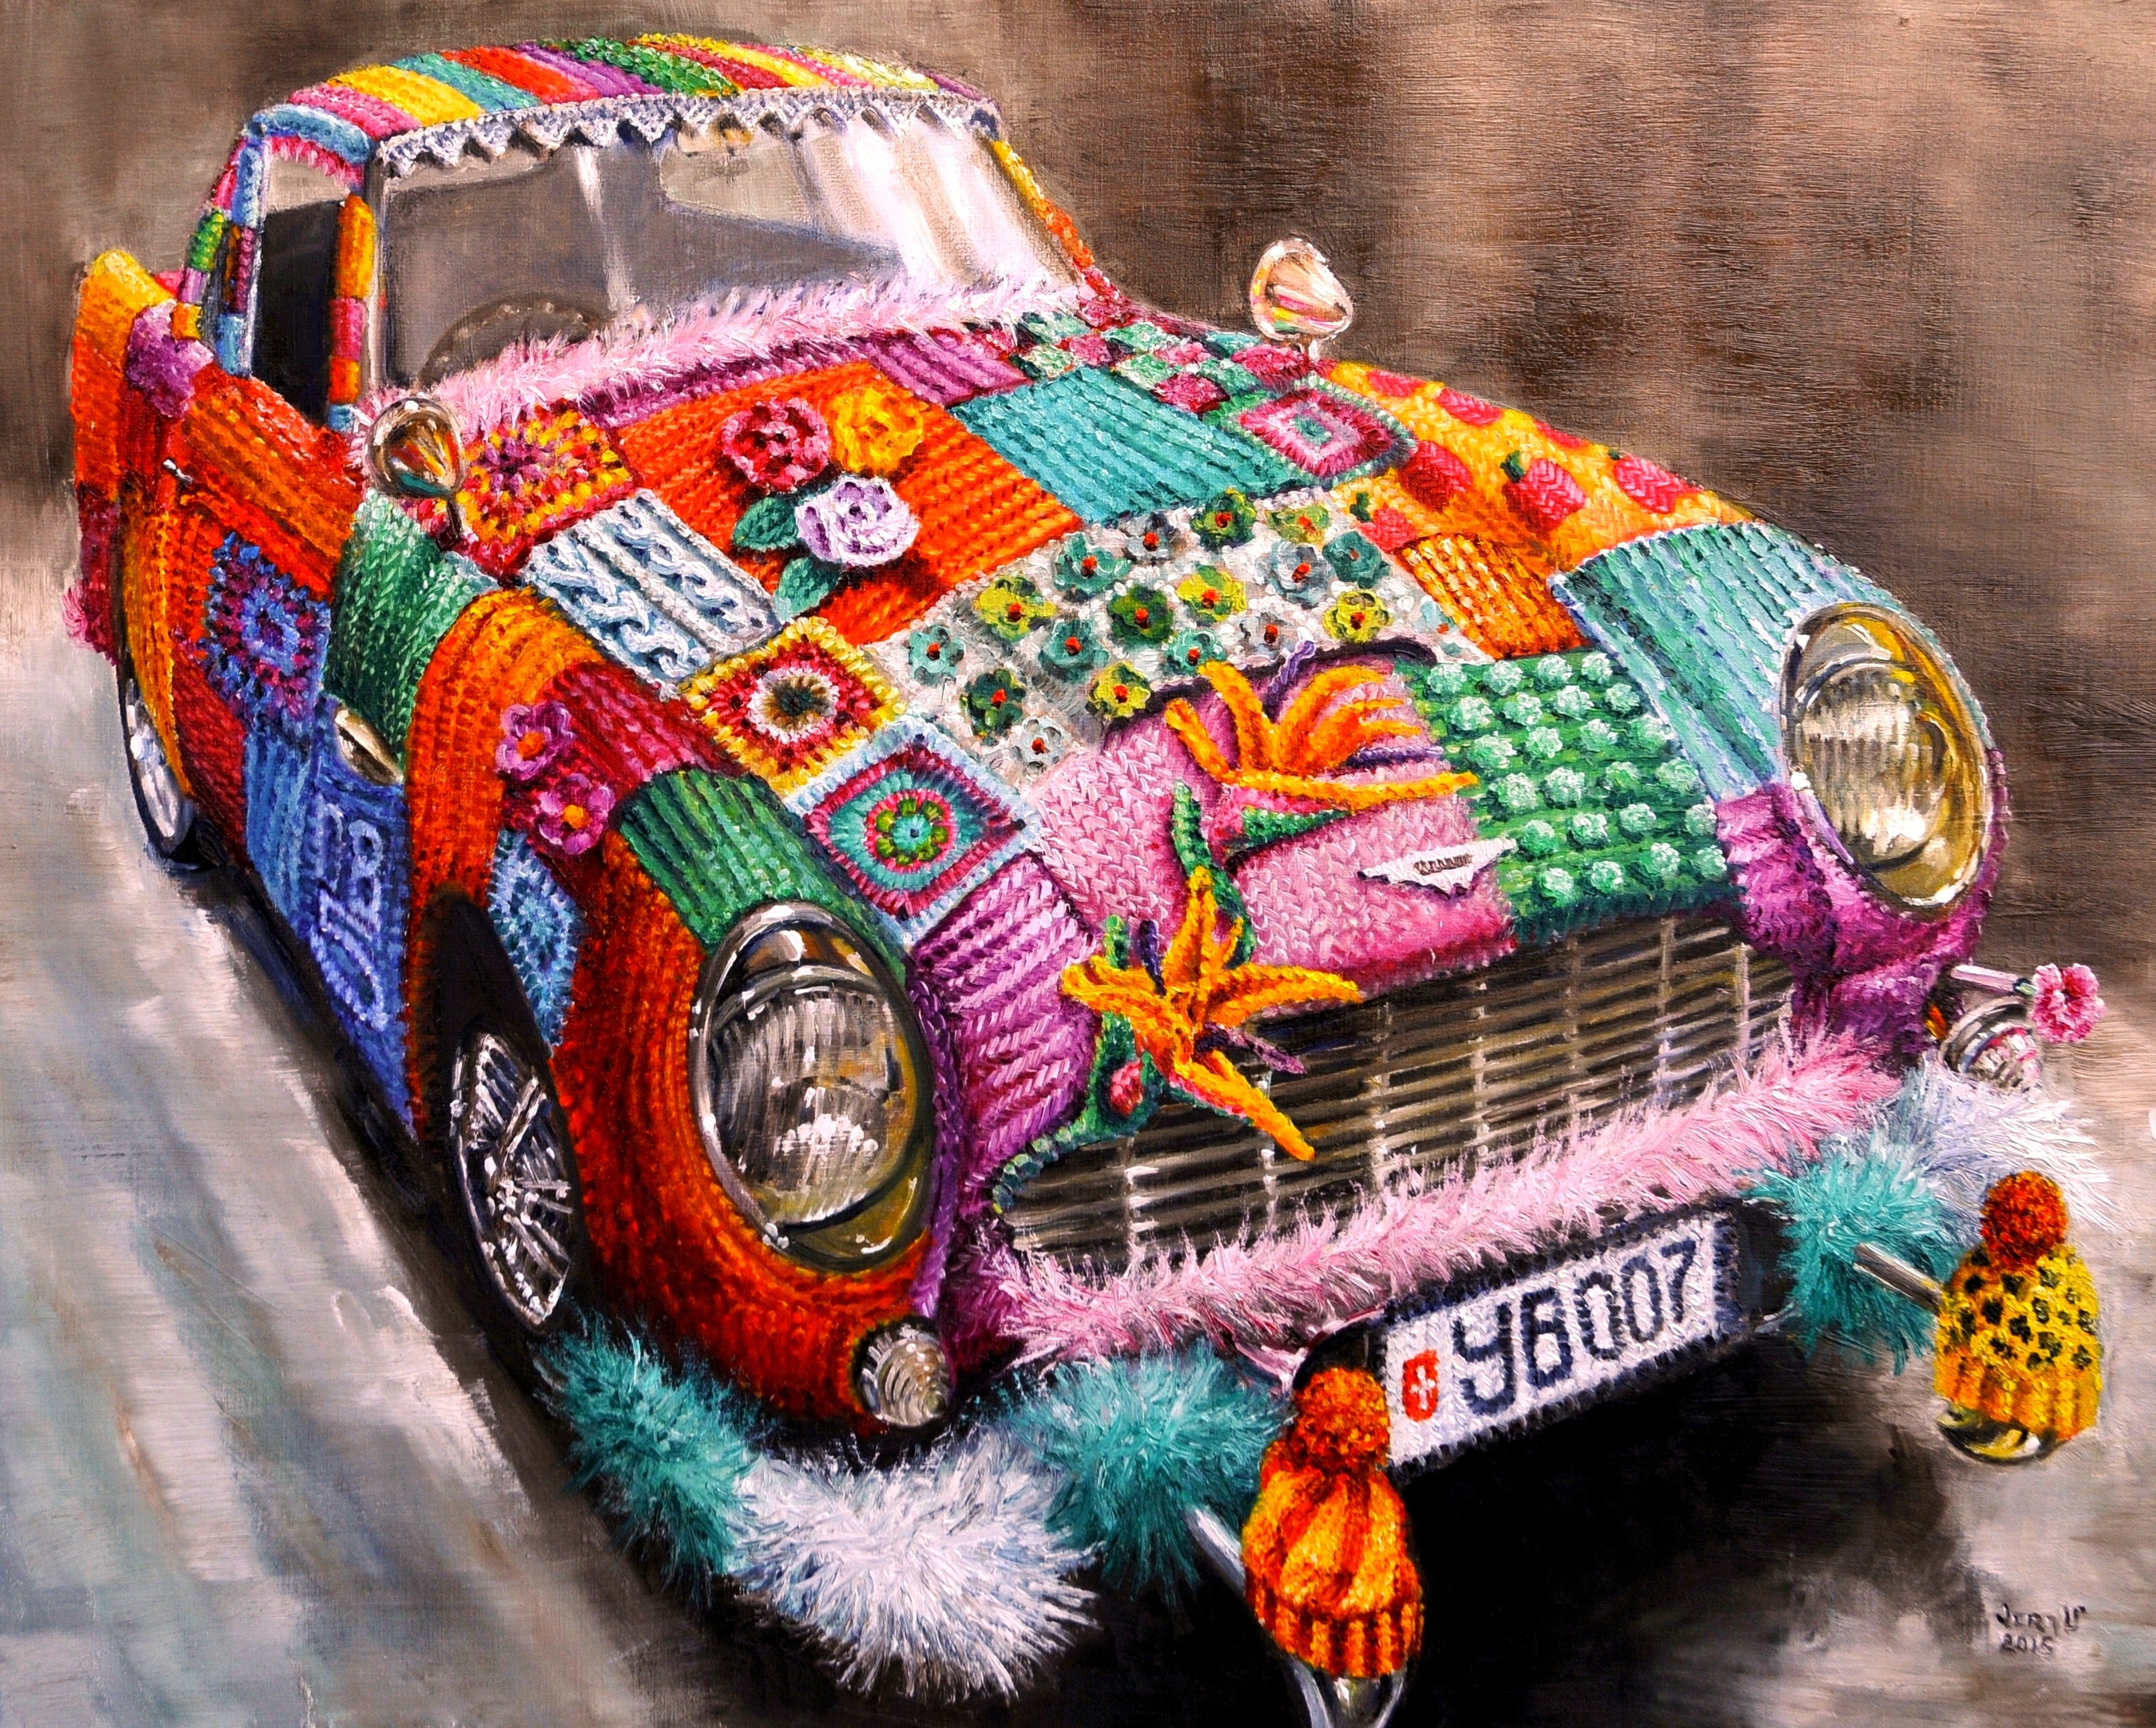 The name's Bombed, Yarn Bombed | Oil paint on linen | Year: 2015 | Dimensions: 80X100cm